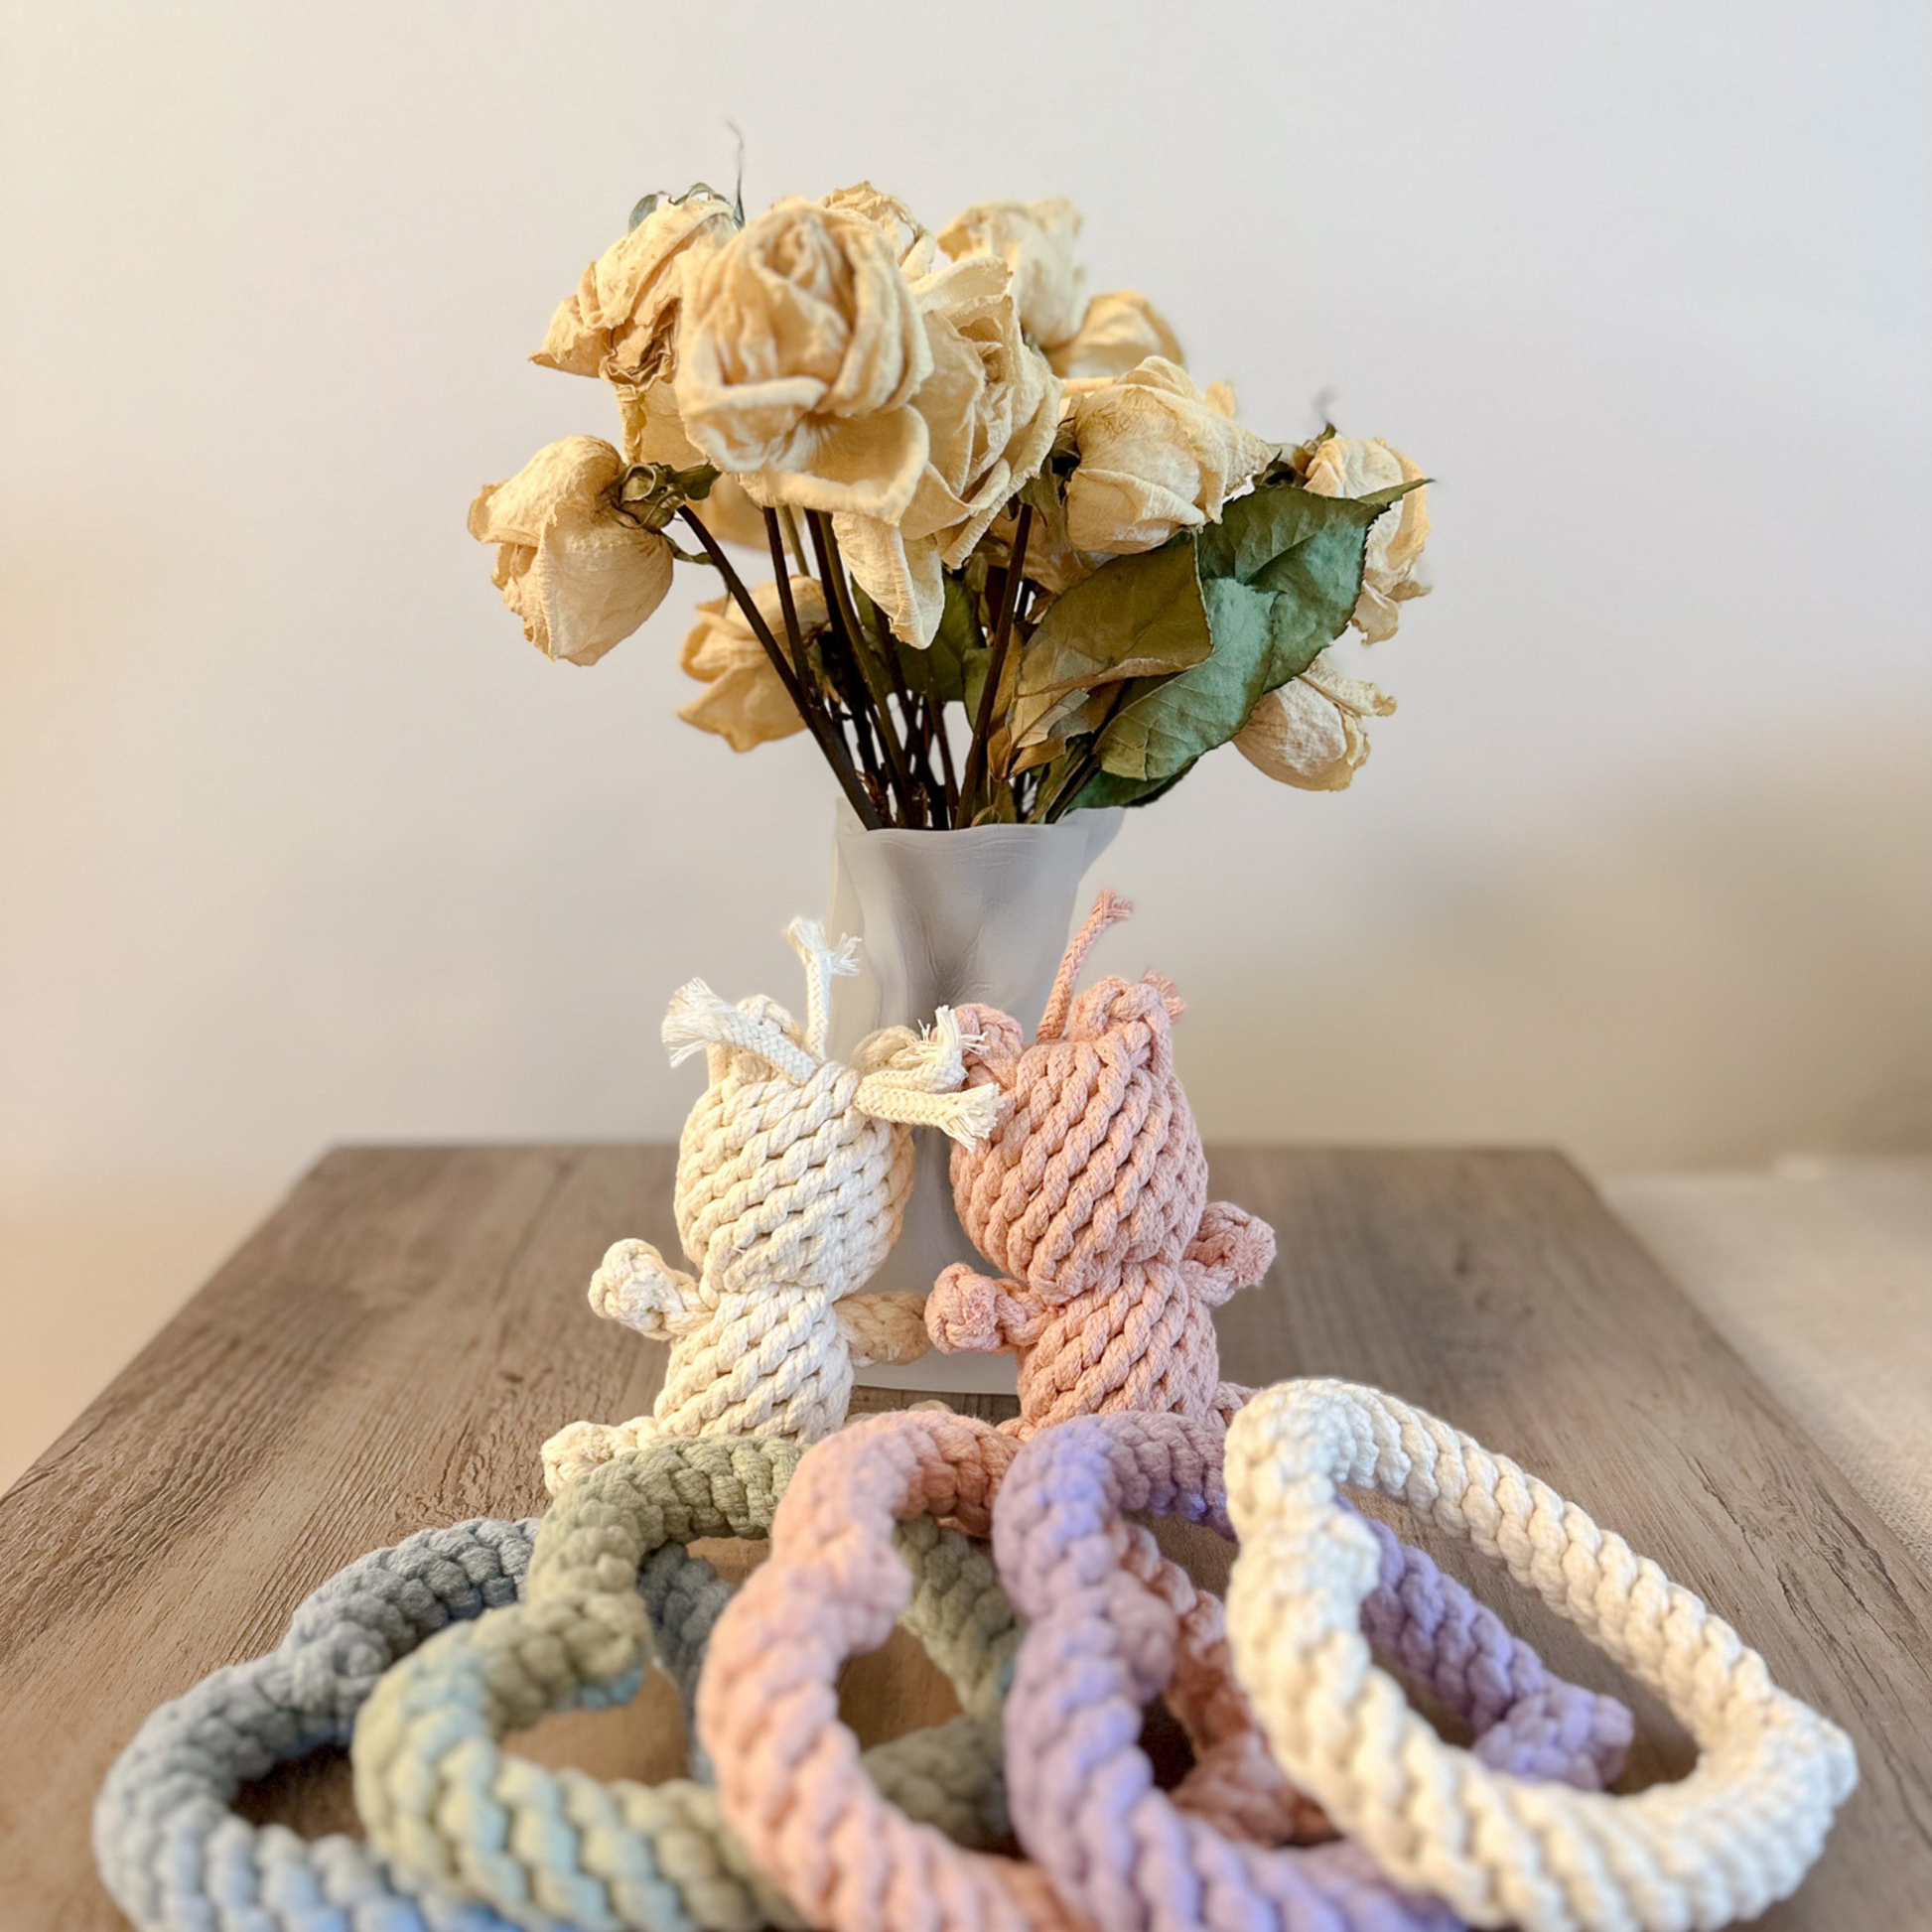 Adorable pet toys handwoven with love using cotton ropes. Fun and safe for your furry friends!